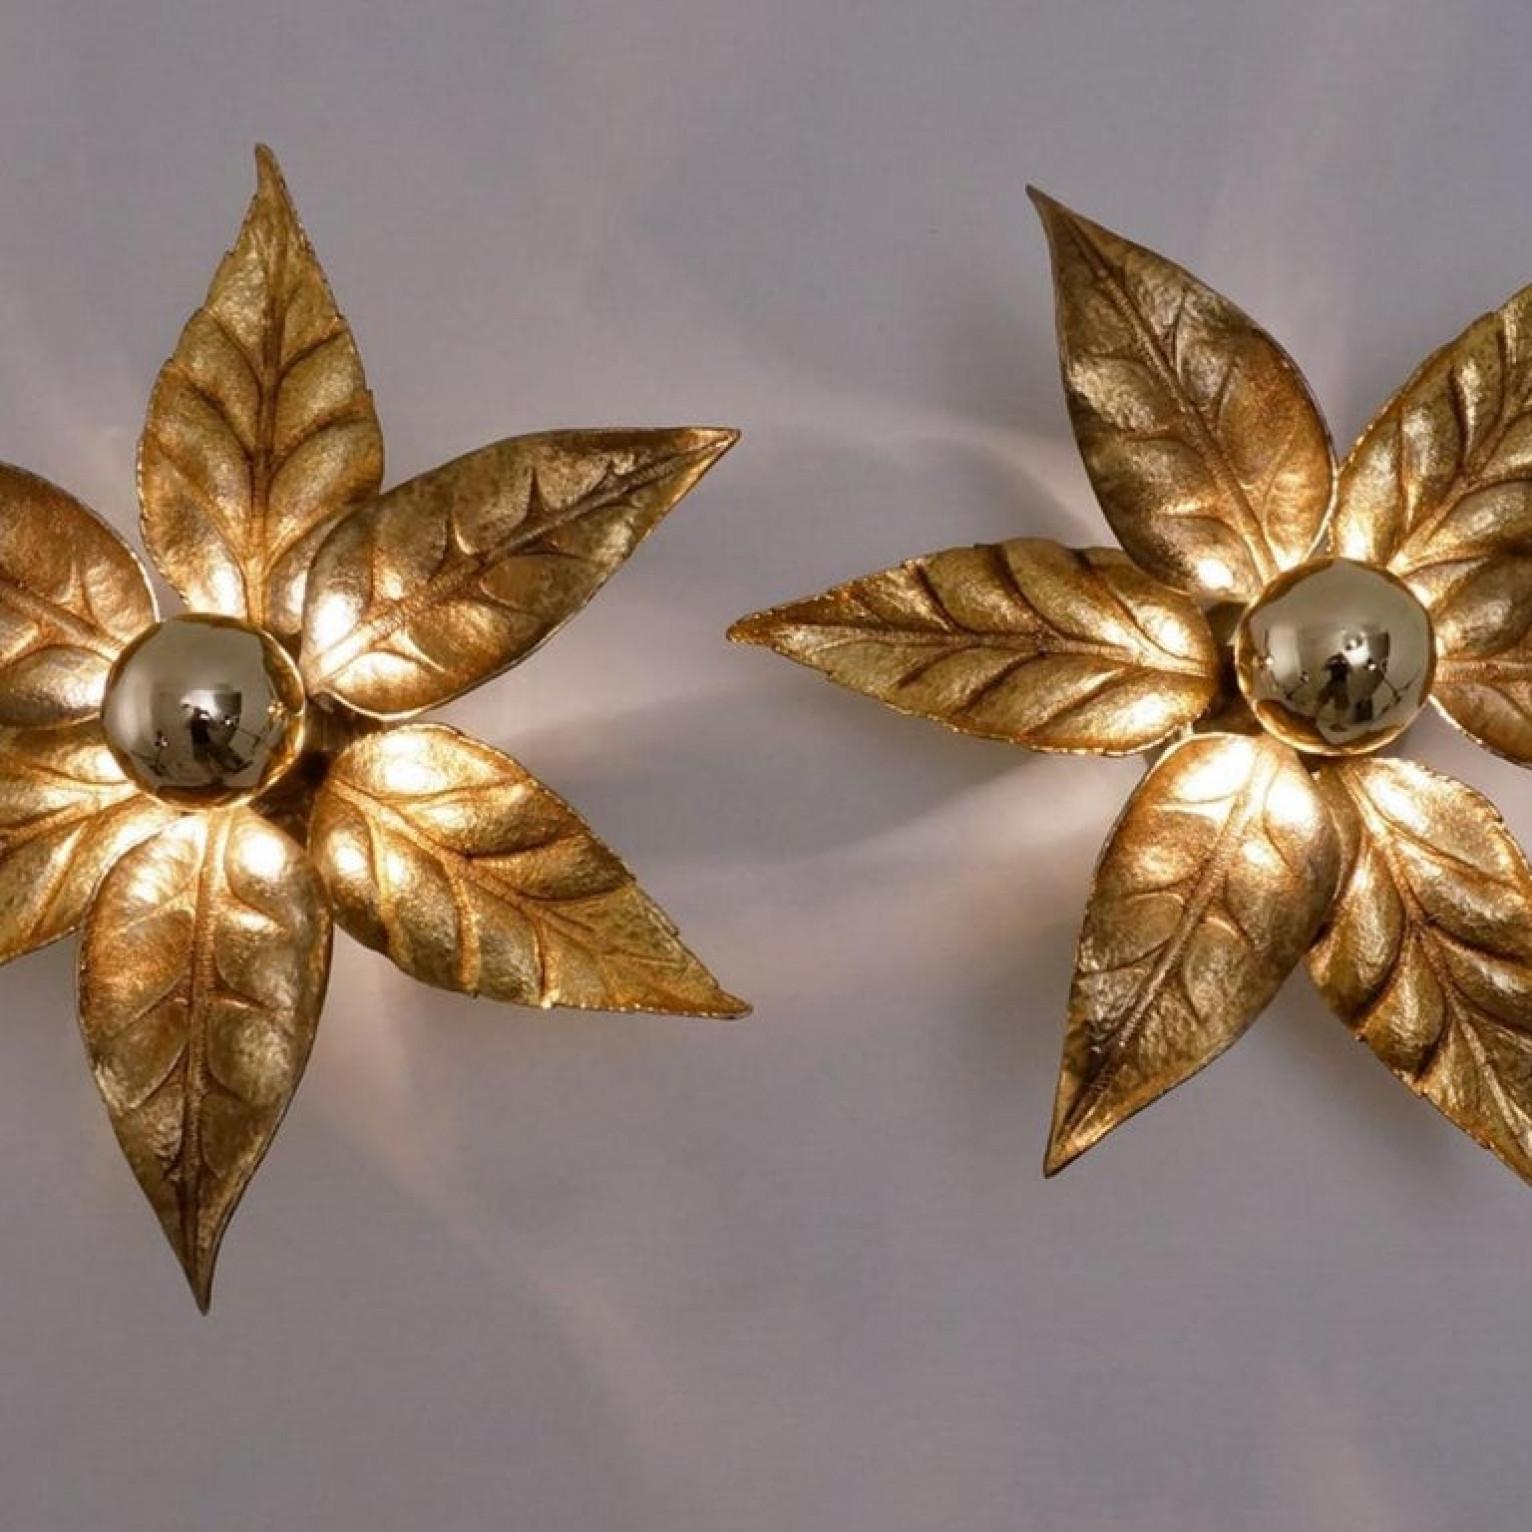 Mid-Century Modern 1 of the 10 Massive Brass Flower Wall Lights, Willy Daro Style, 1970s For Sale